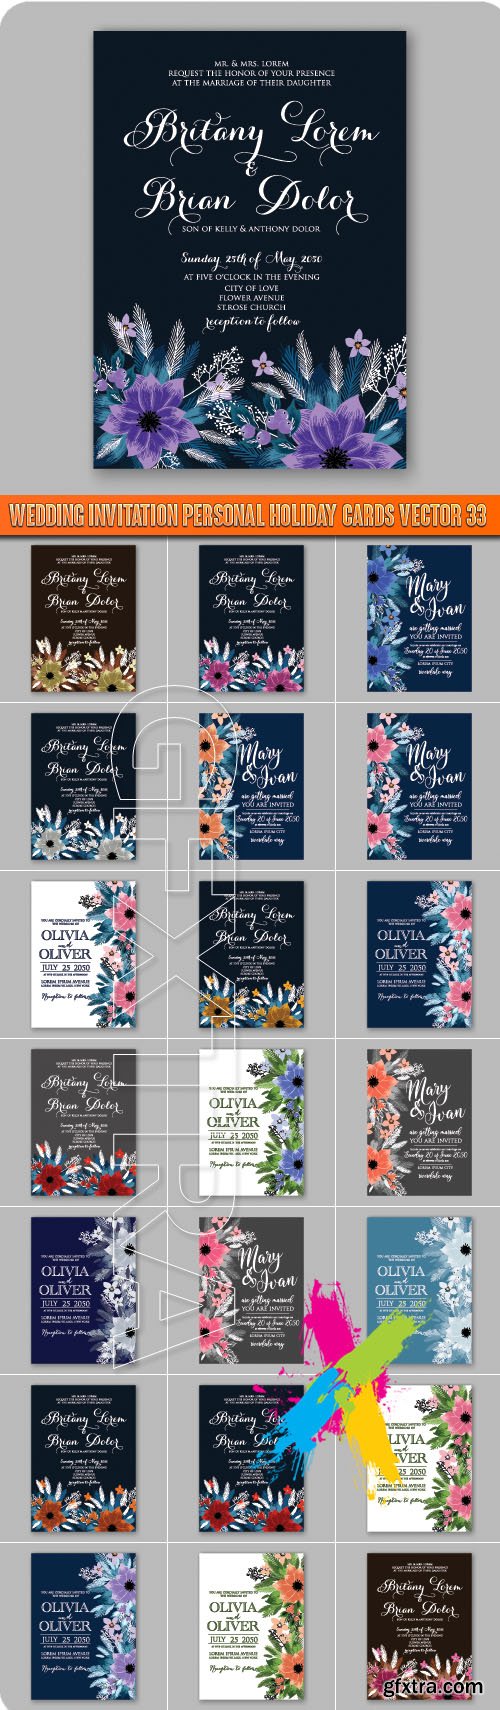 Wedding invitation personal holiday cards vector 33